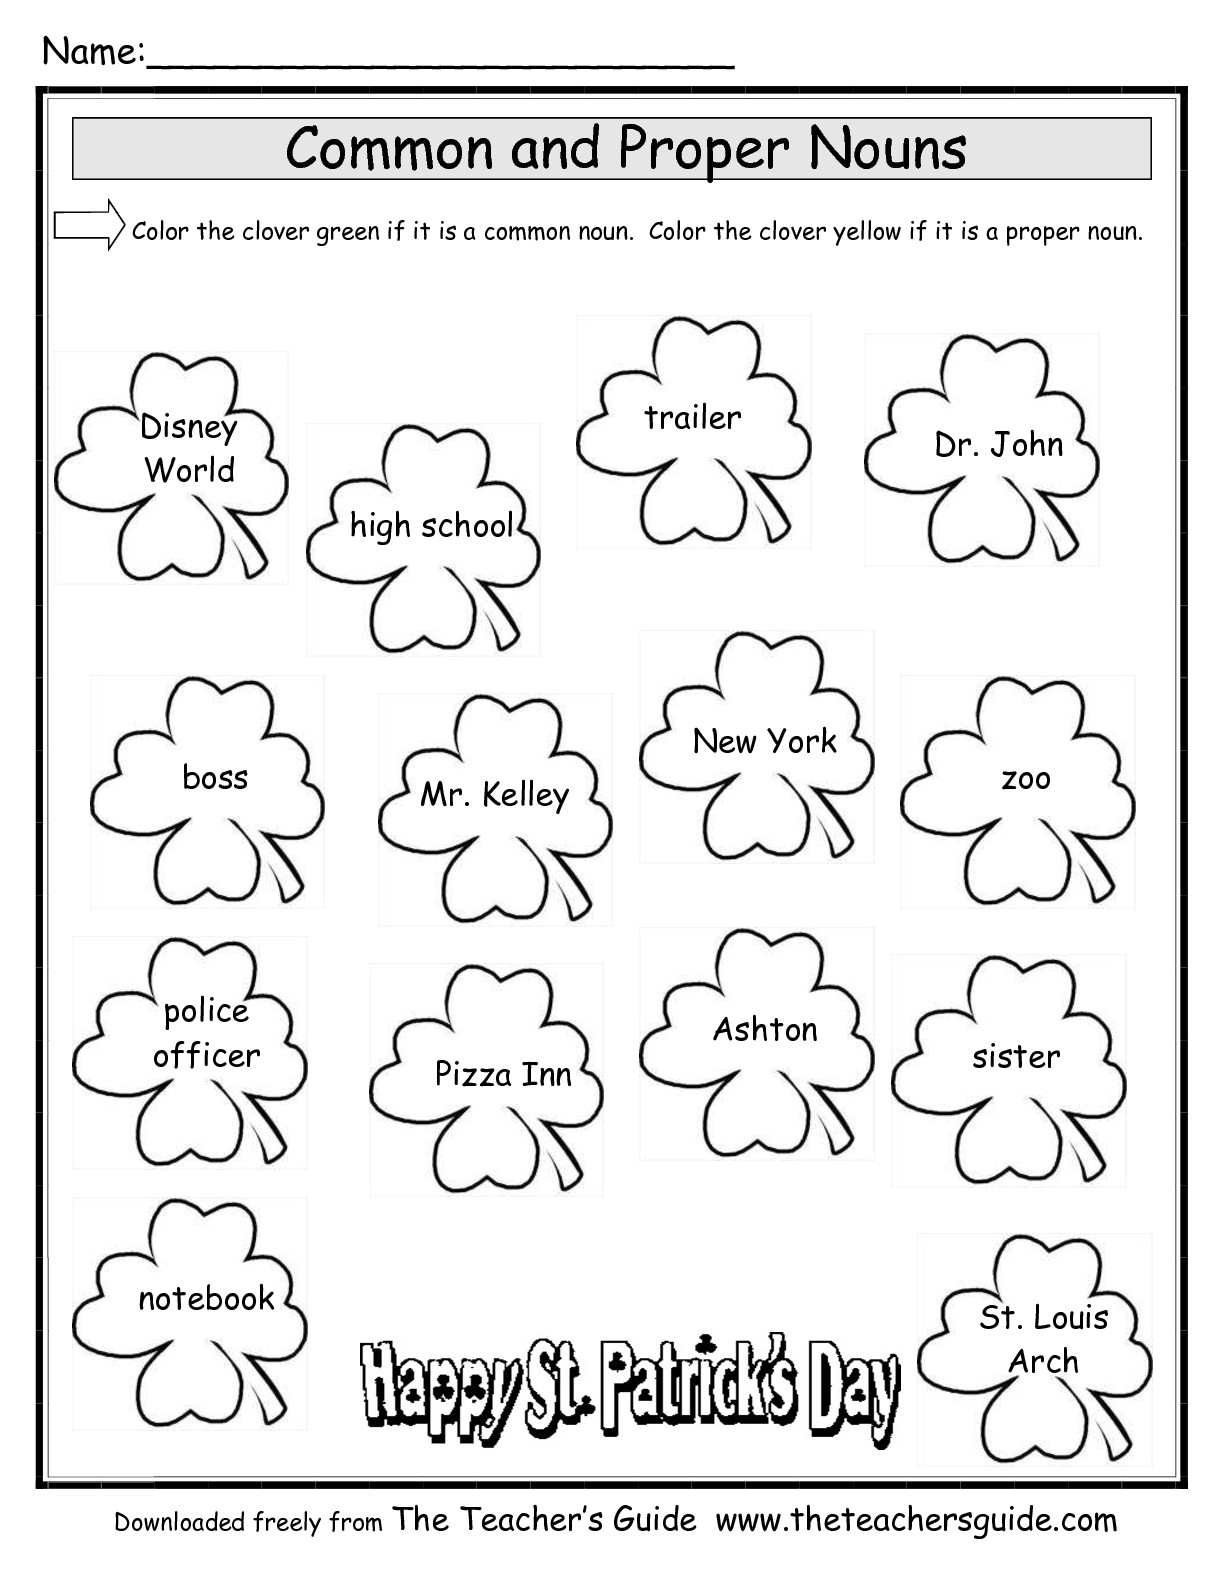 30 Nouns Worksheet For Grade 1 Image Rugby Rumilly